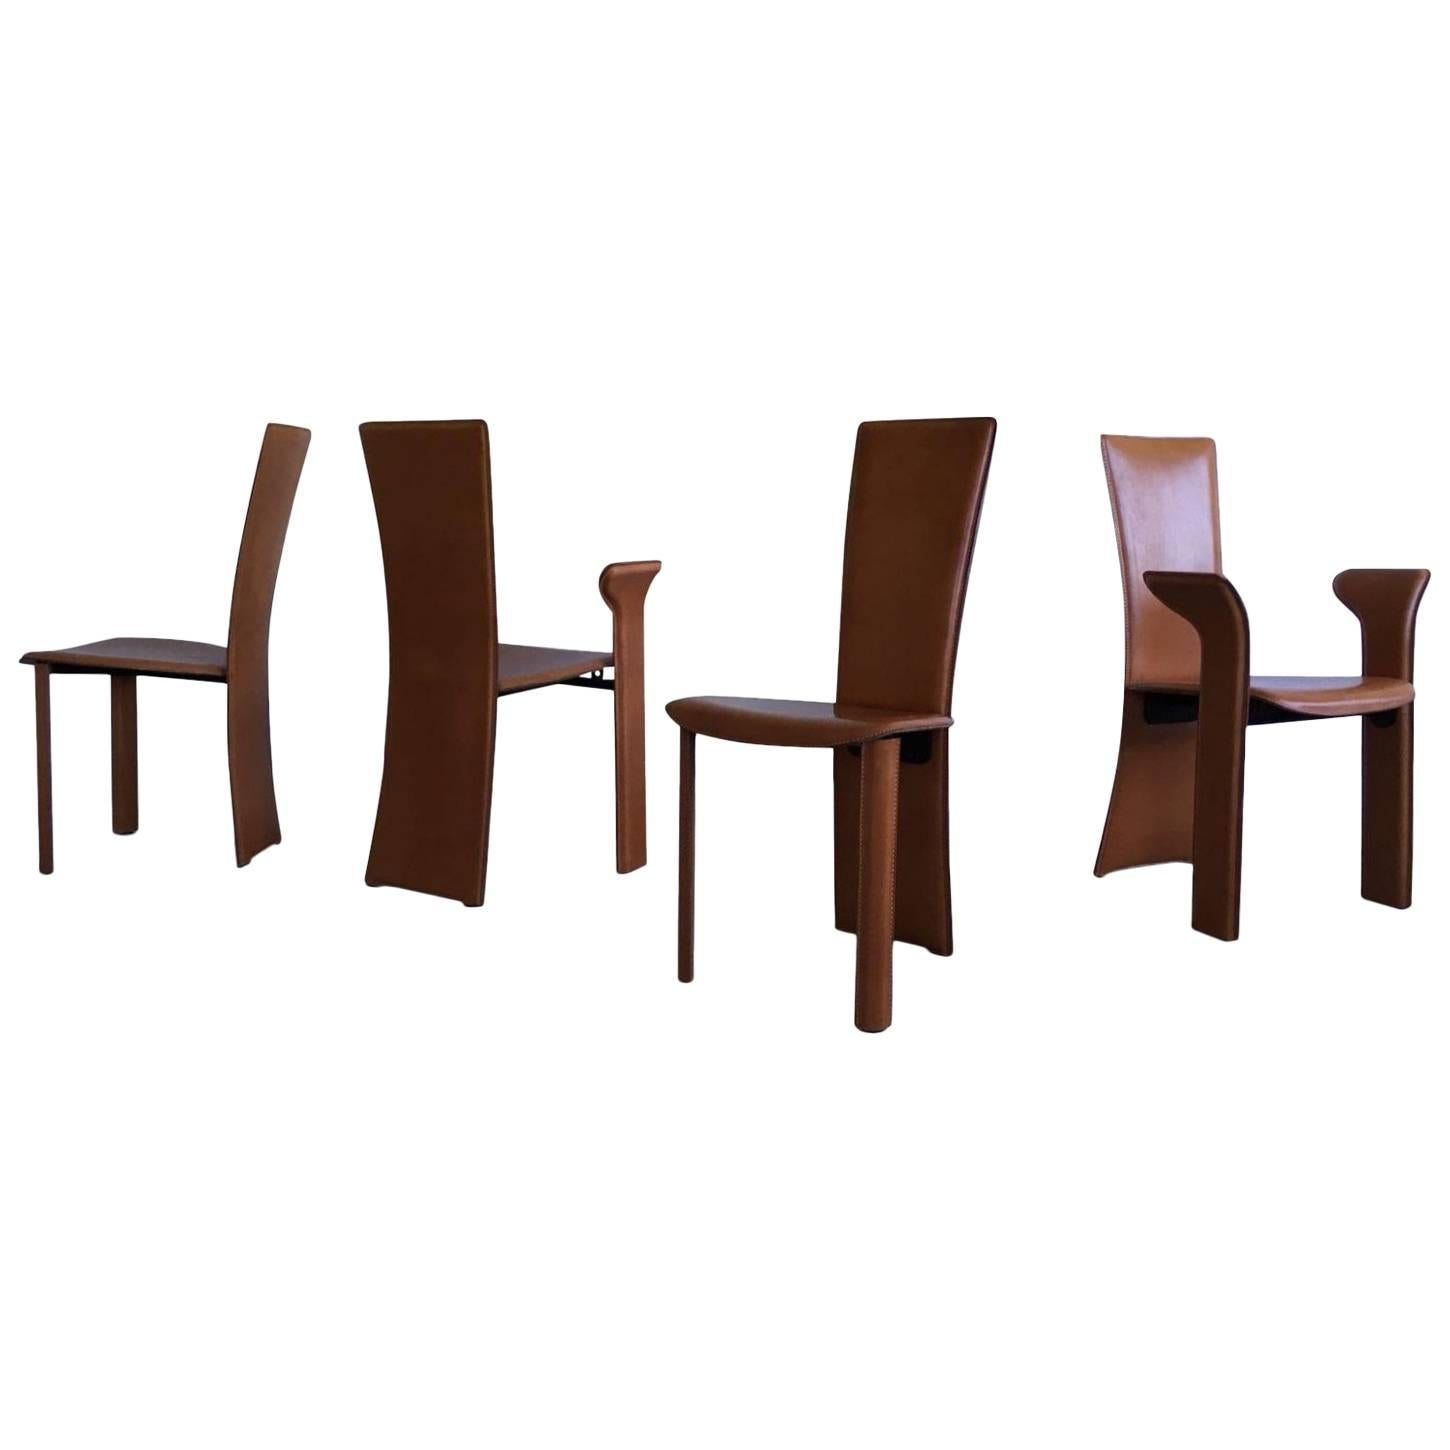 Frag, Set of Four Cognac Colored Leather Dining Chairs, circa 1980s